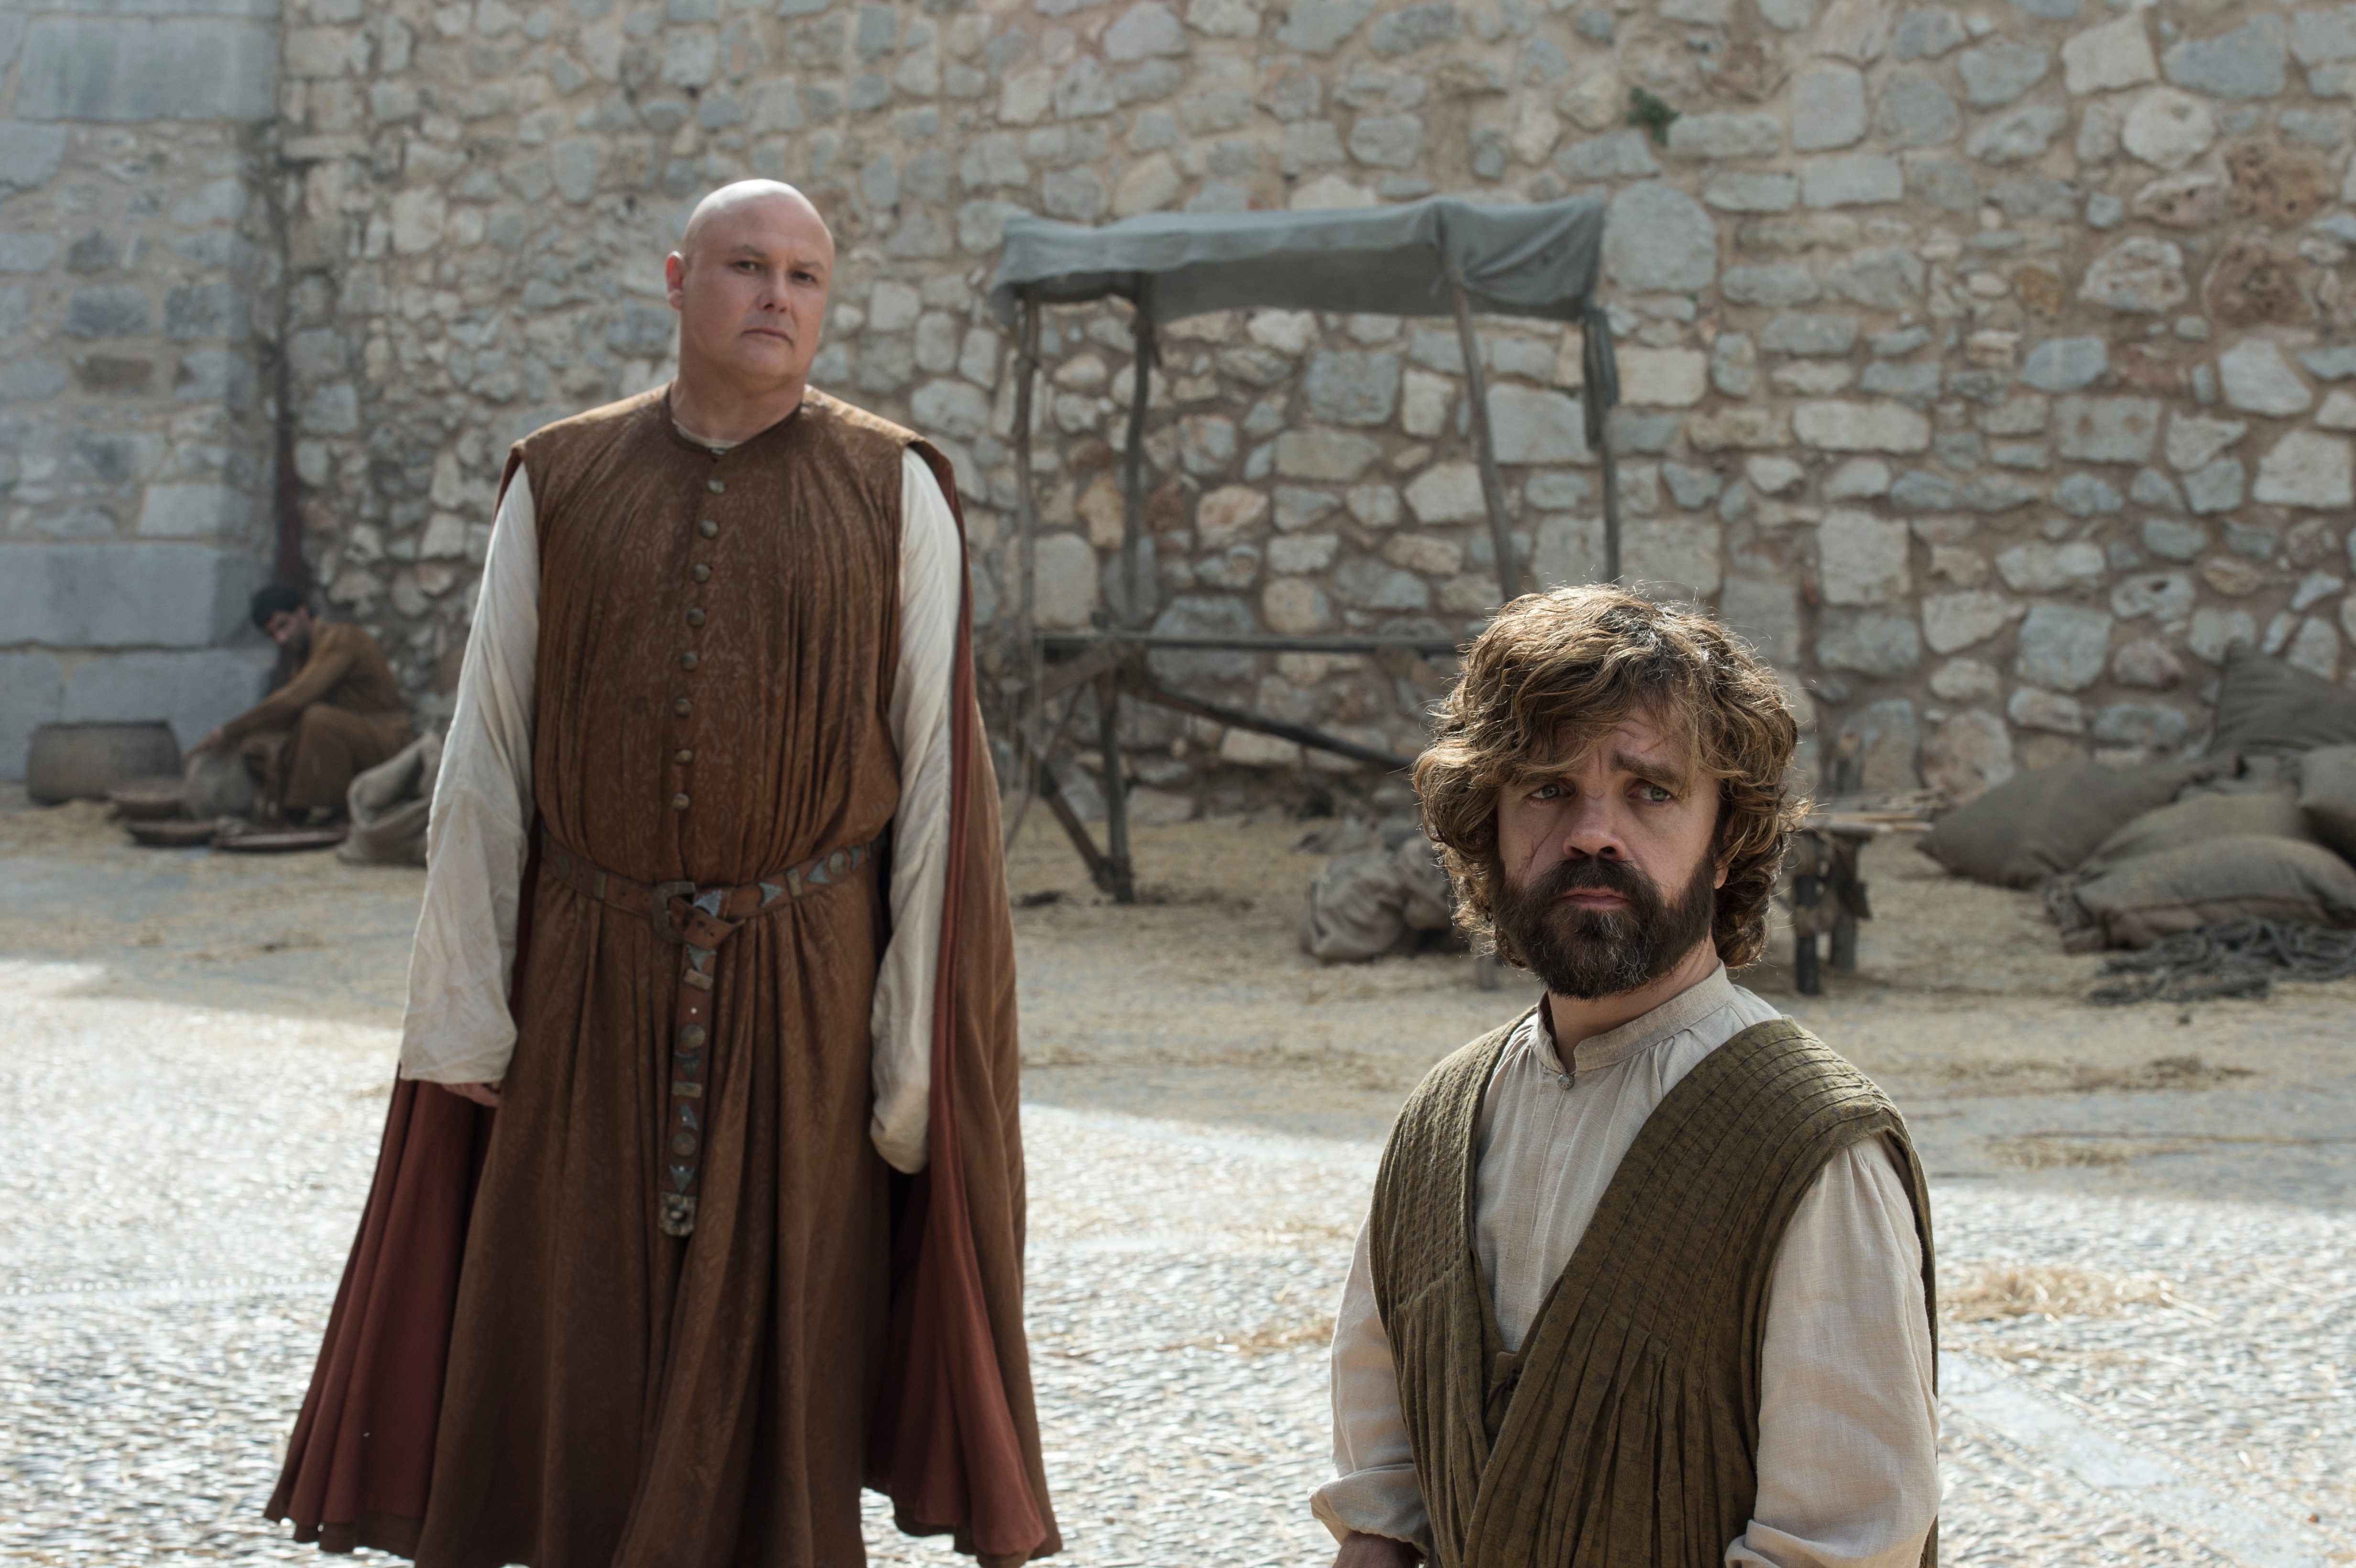 Conleth Hill as Varys and Peter Dinklage as Tyrion Lannister. Photo by Macall B. Polay/HBO 